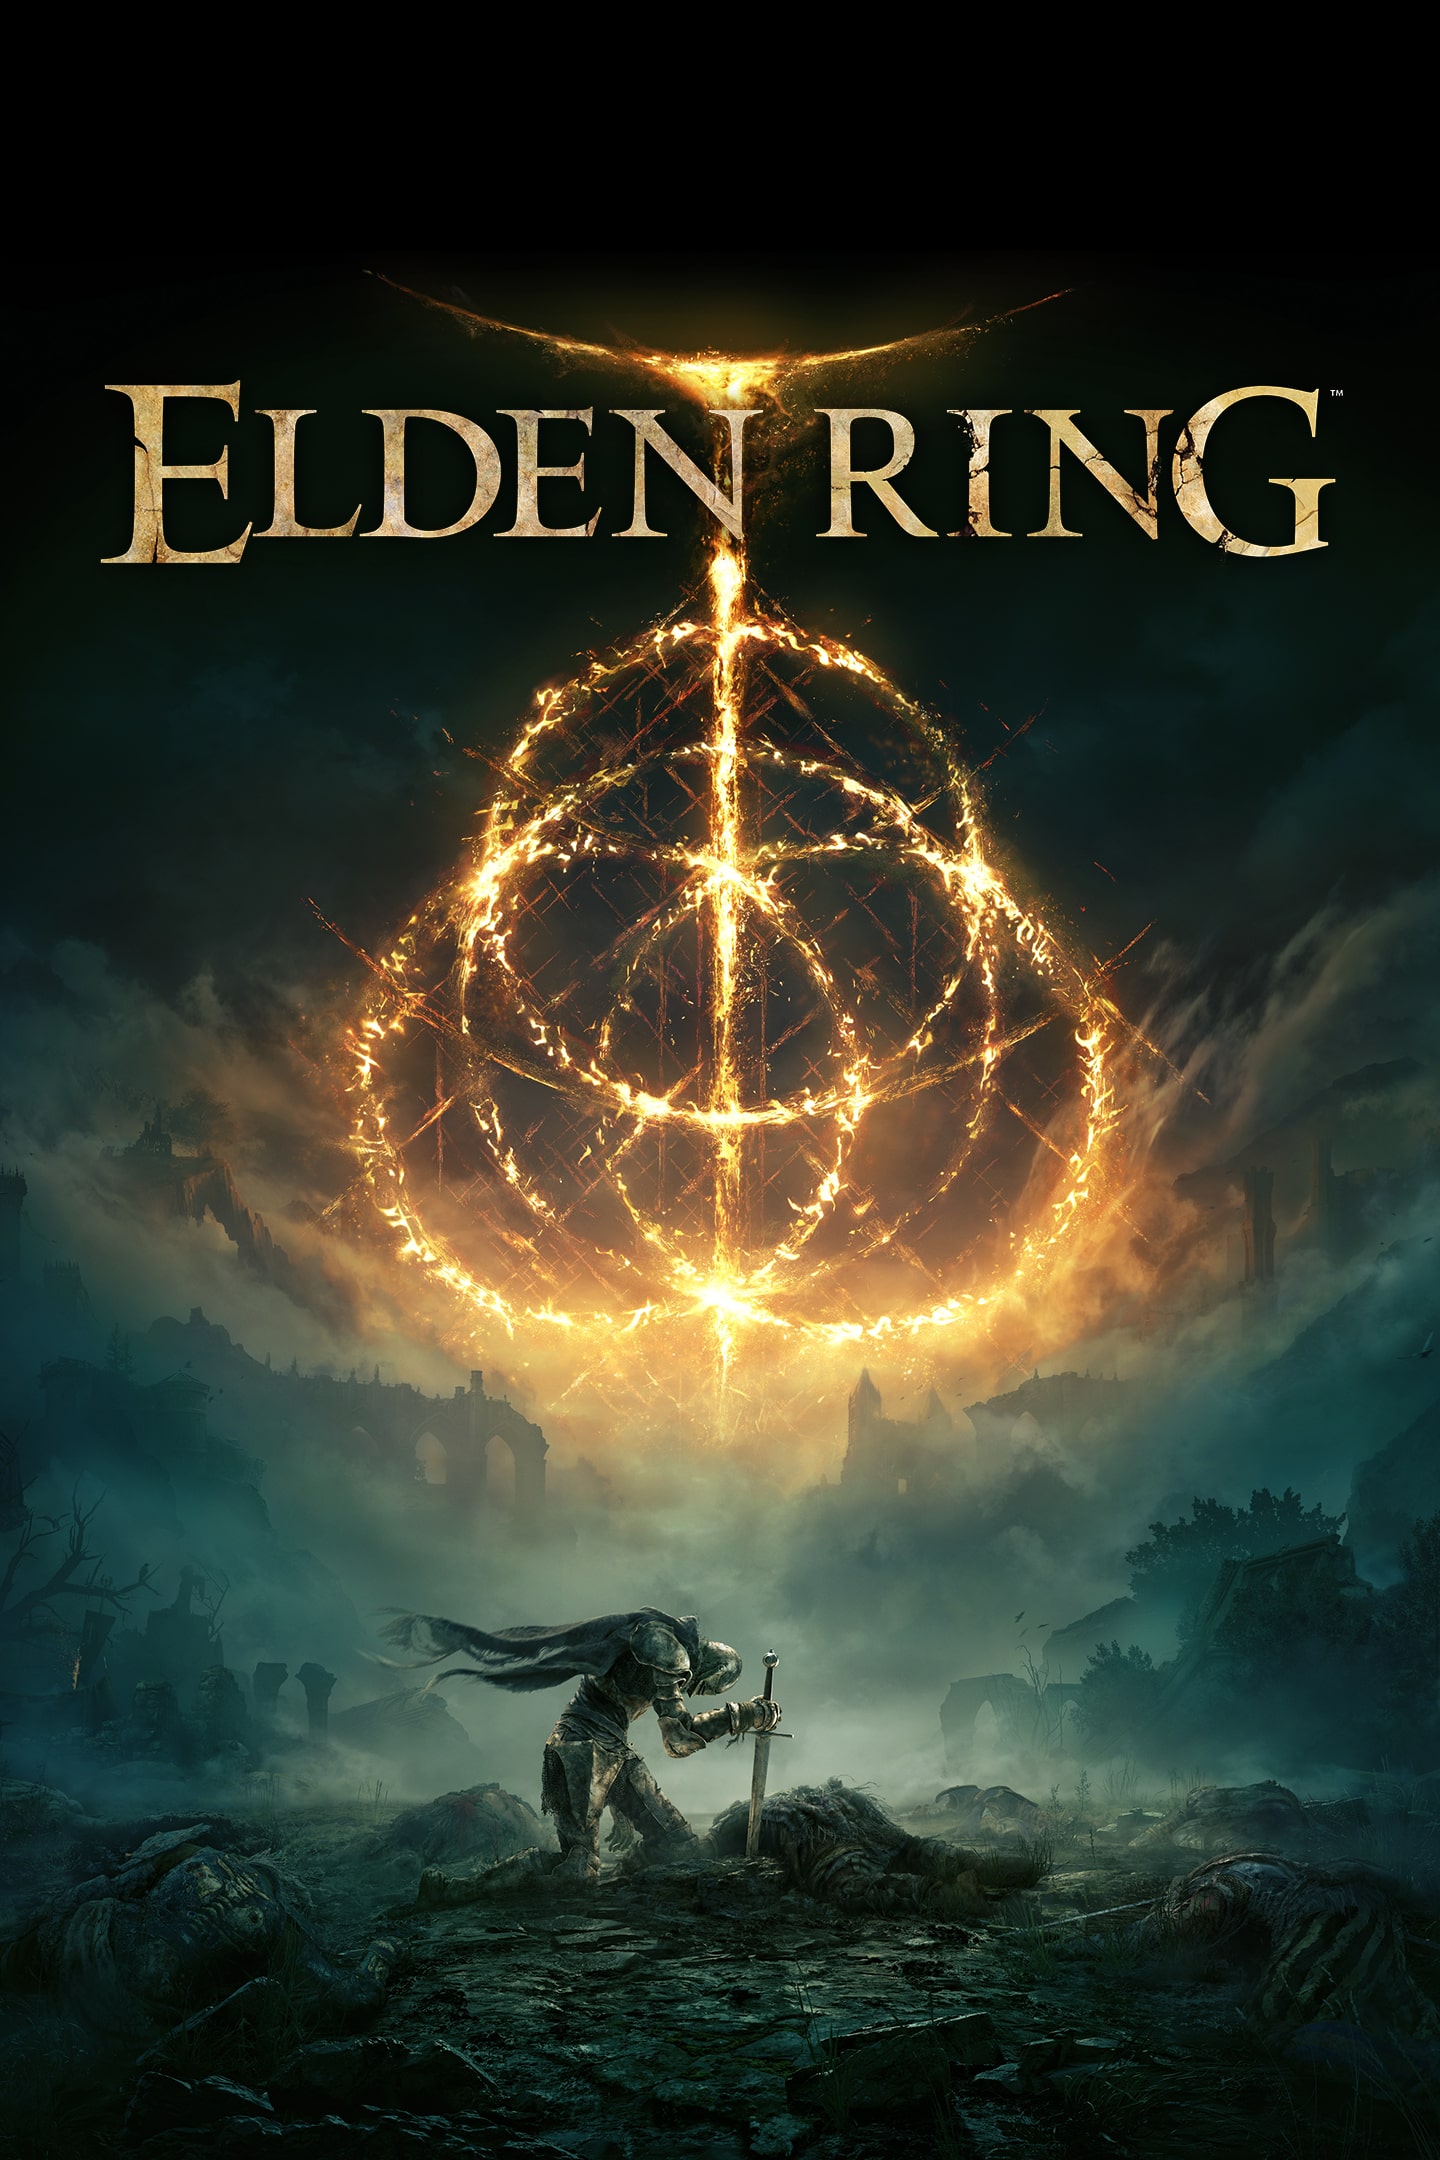 5 titles like Elden Ring you should try out in 2023